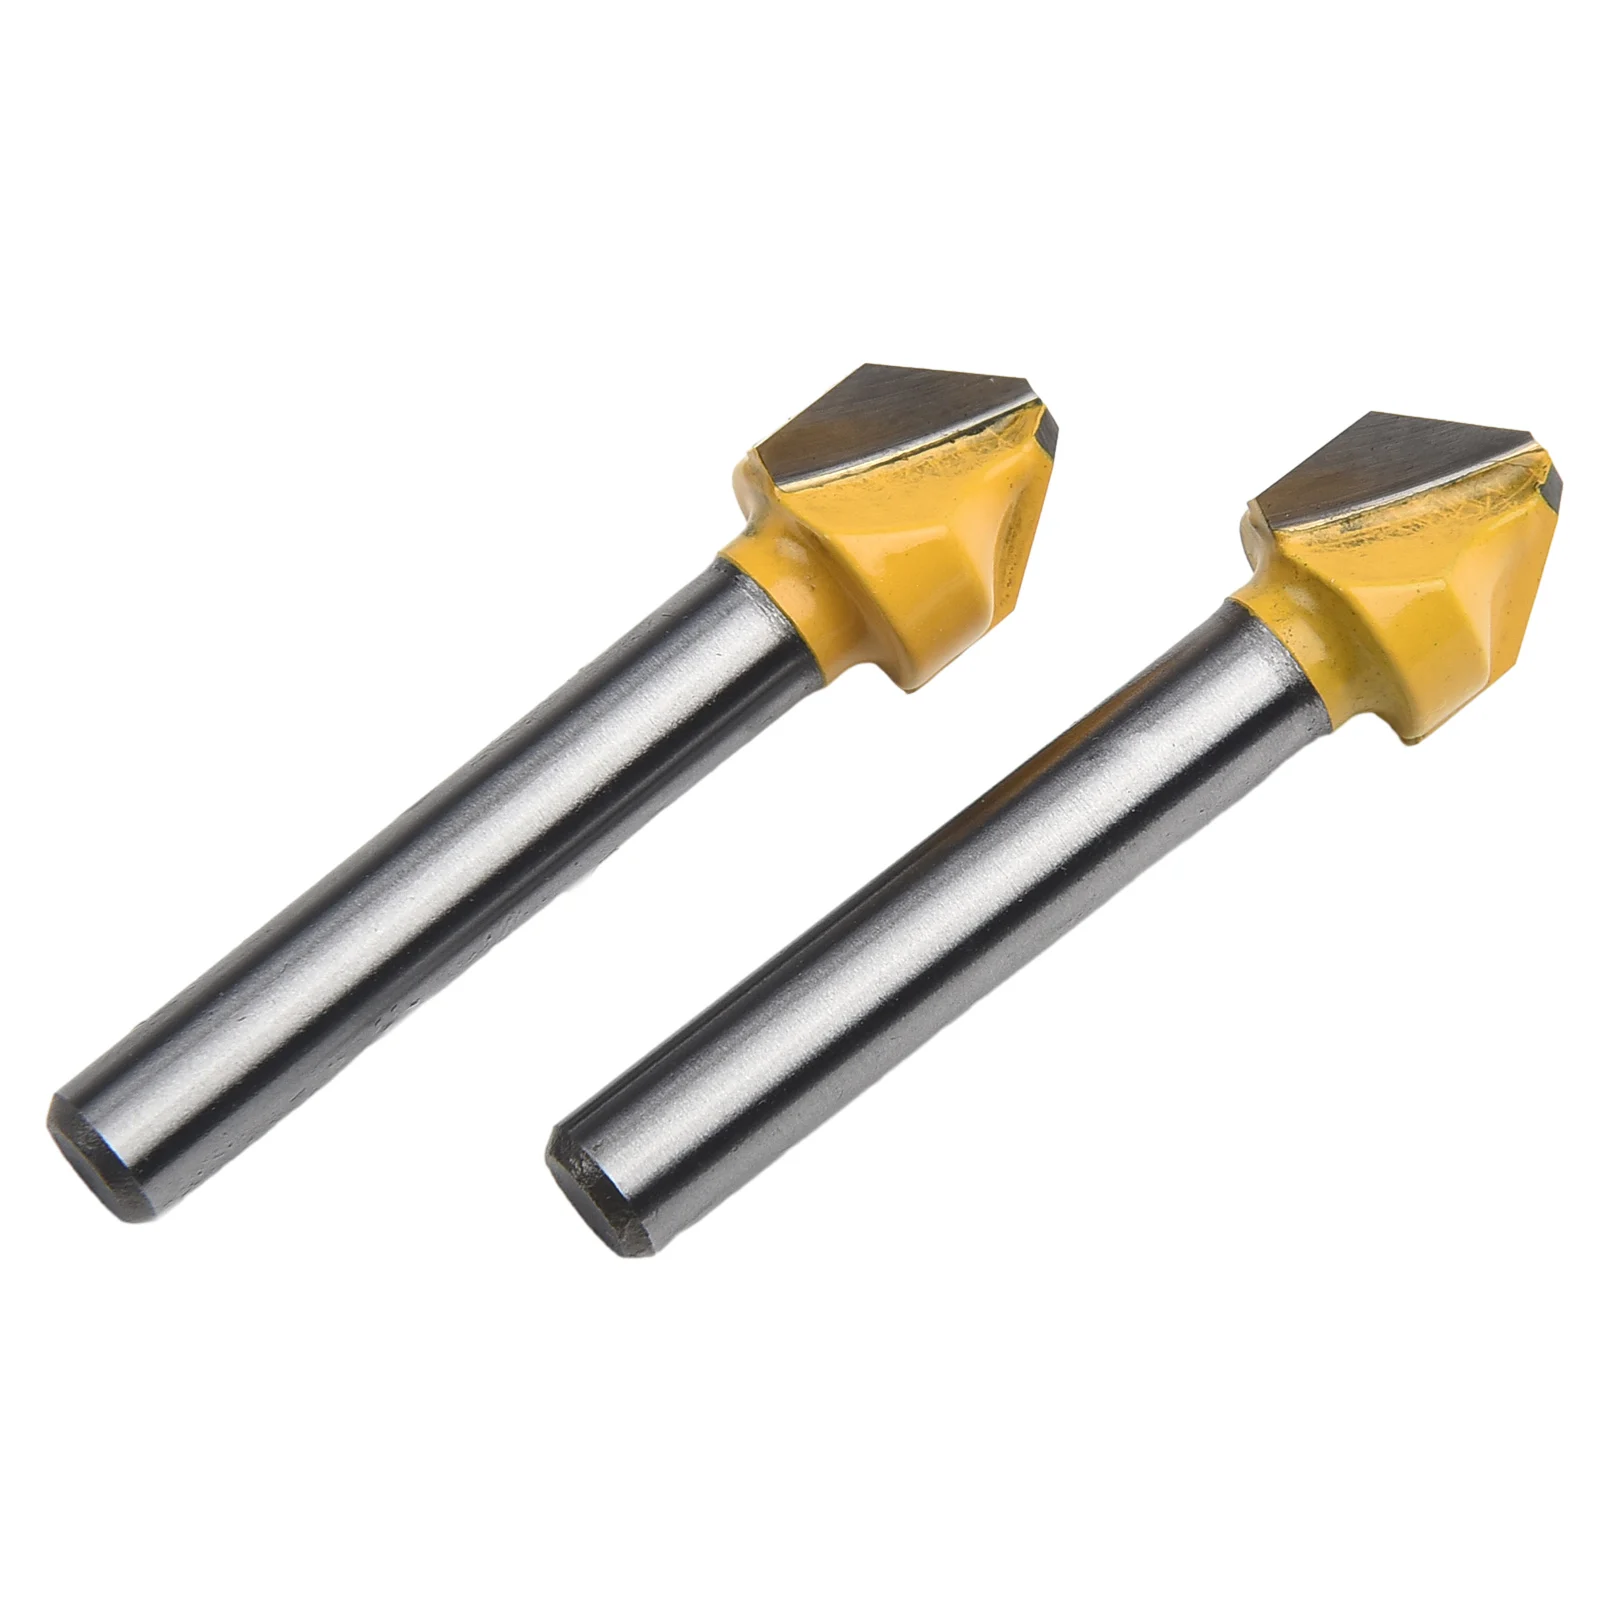 

2pcs 6mm Shank 90 Degree V-shaped Flat Head Router Bit For Woodworking Engraving Milling Cutter Chamfering Tools Accessories